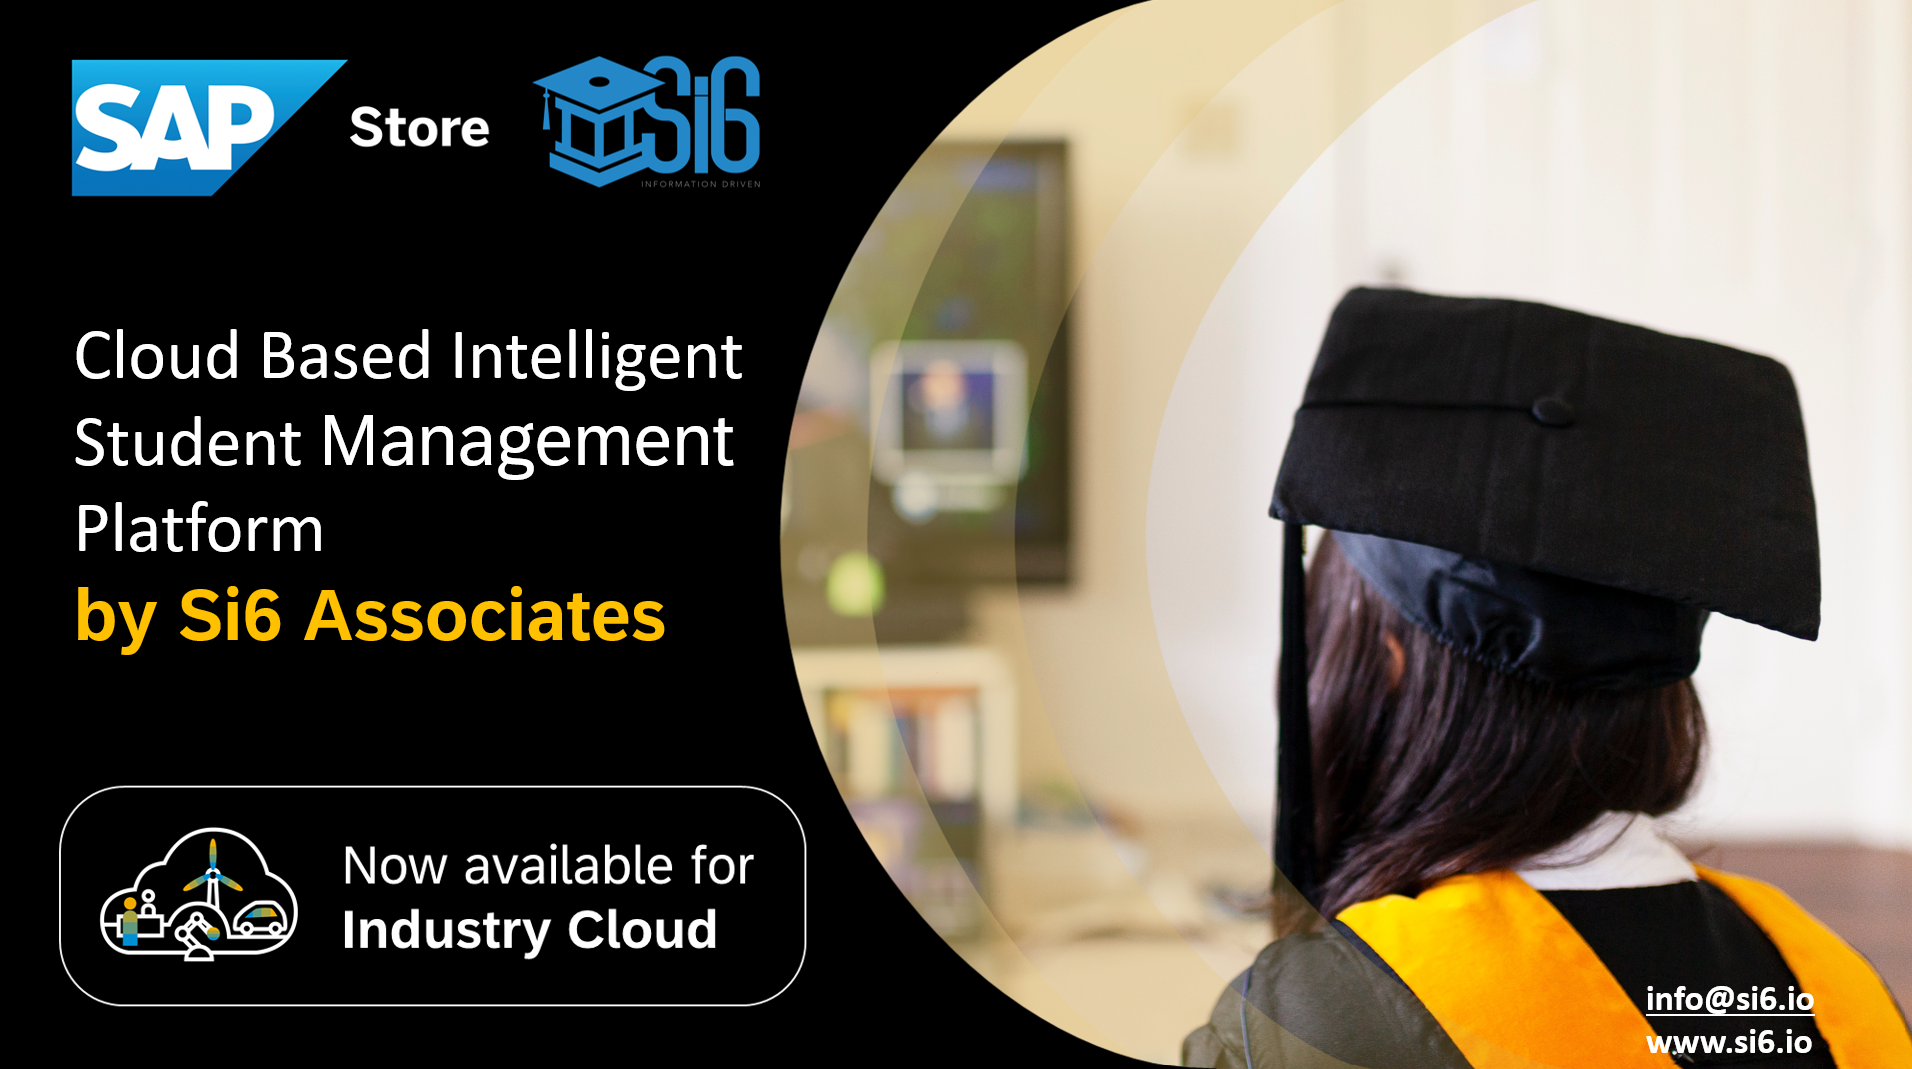 Si6 Industry Cloud for Education Now Available as part of SAP Portfolio